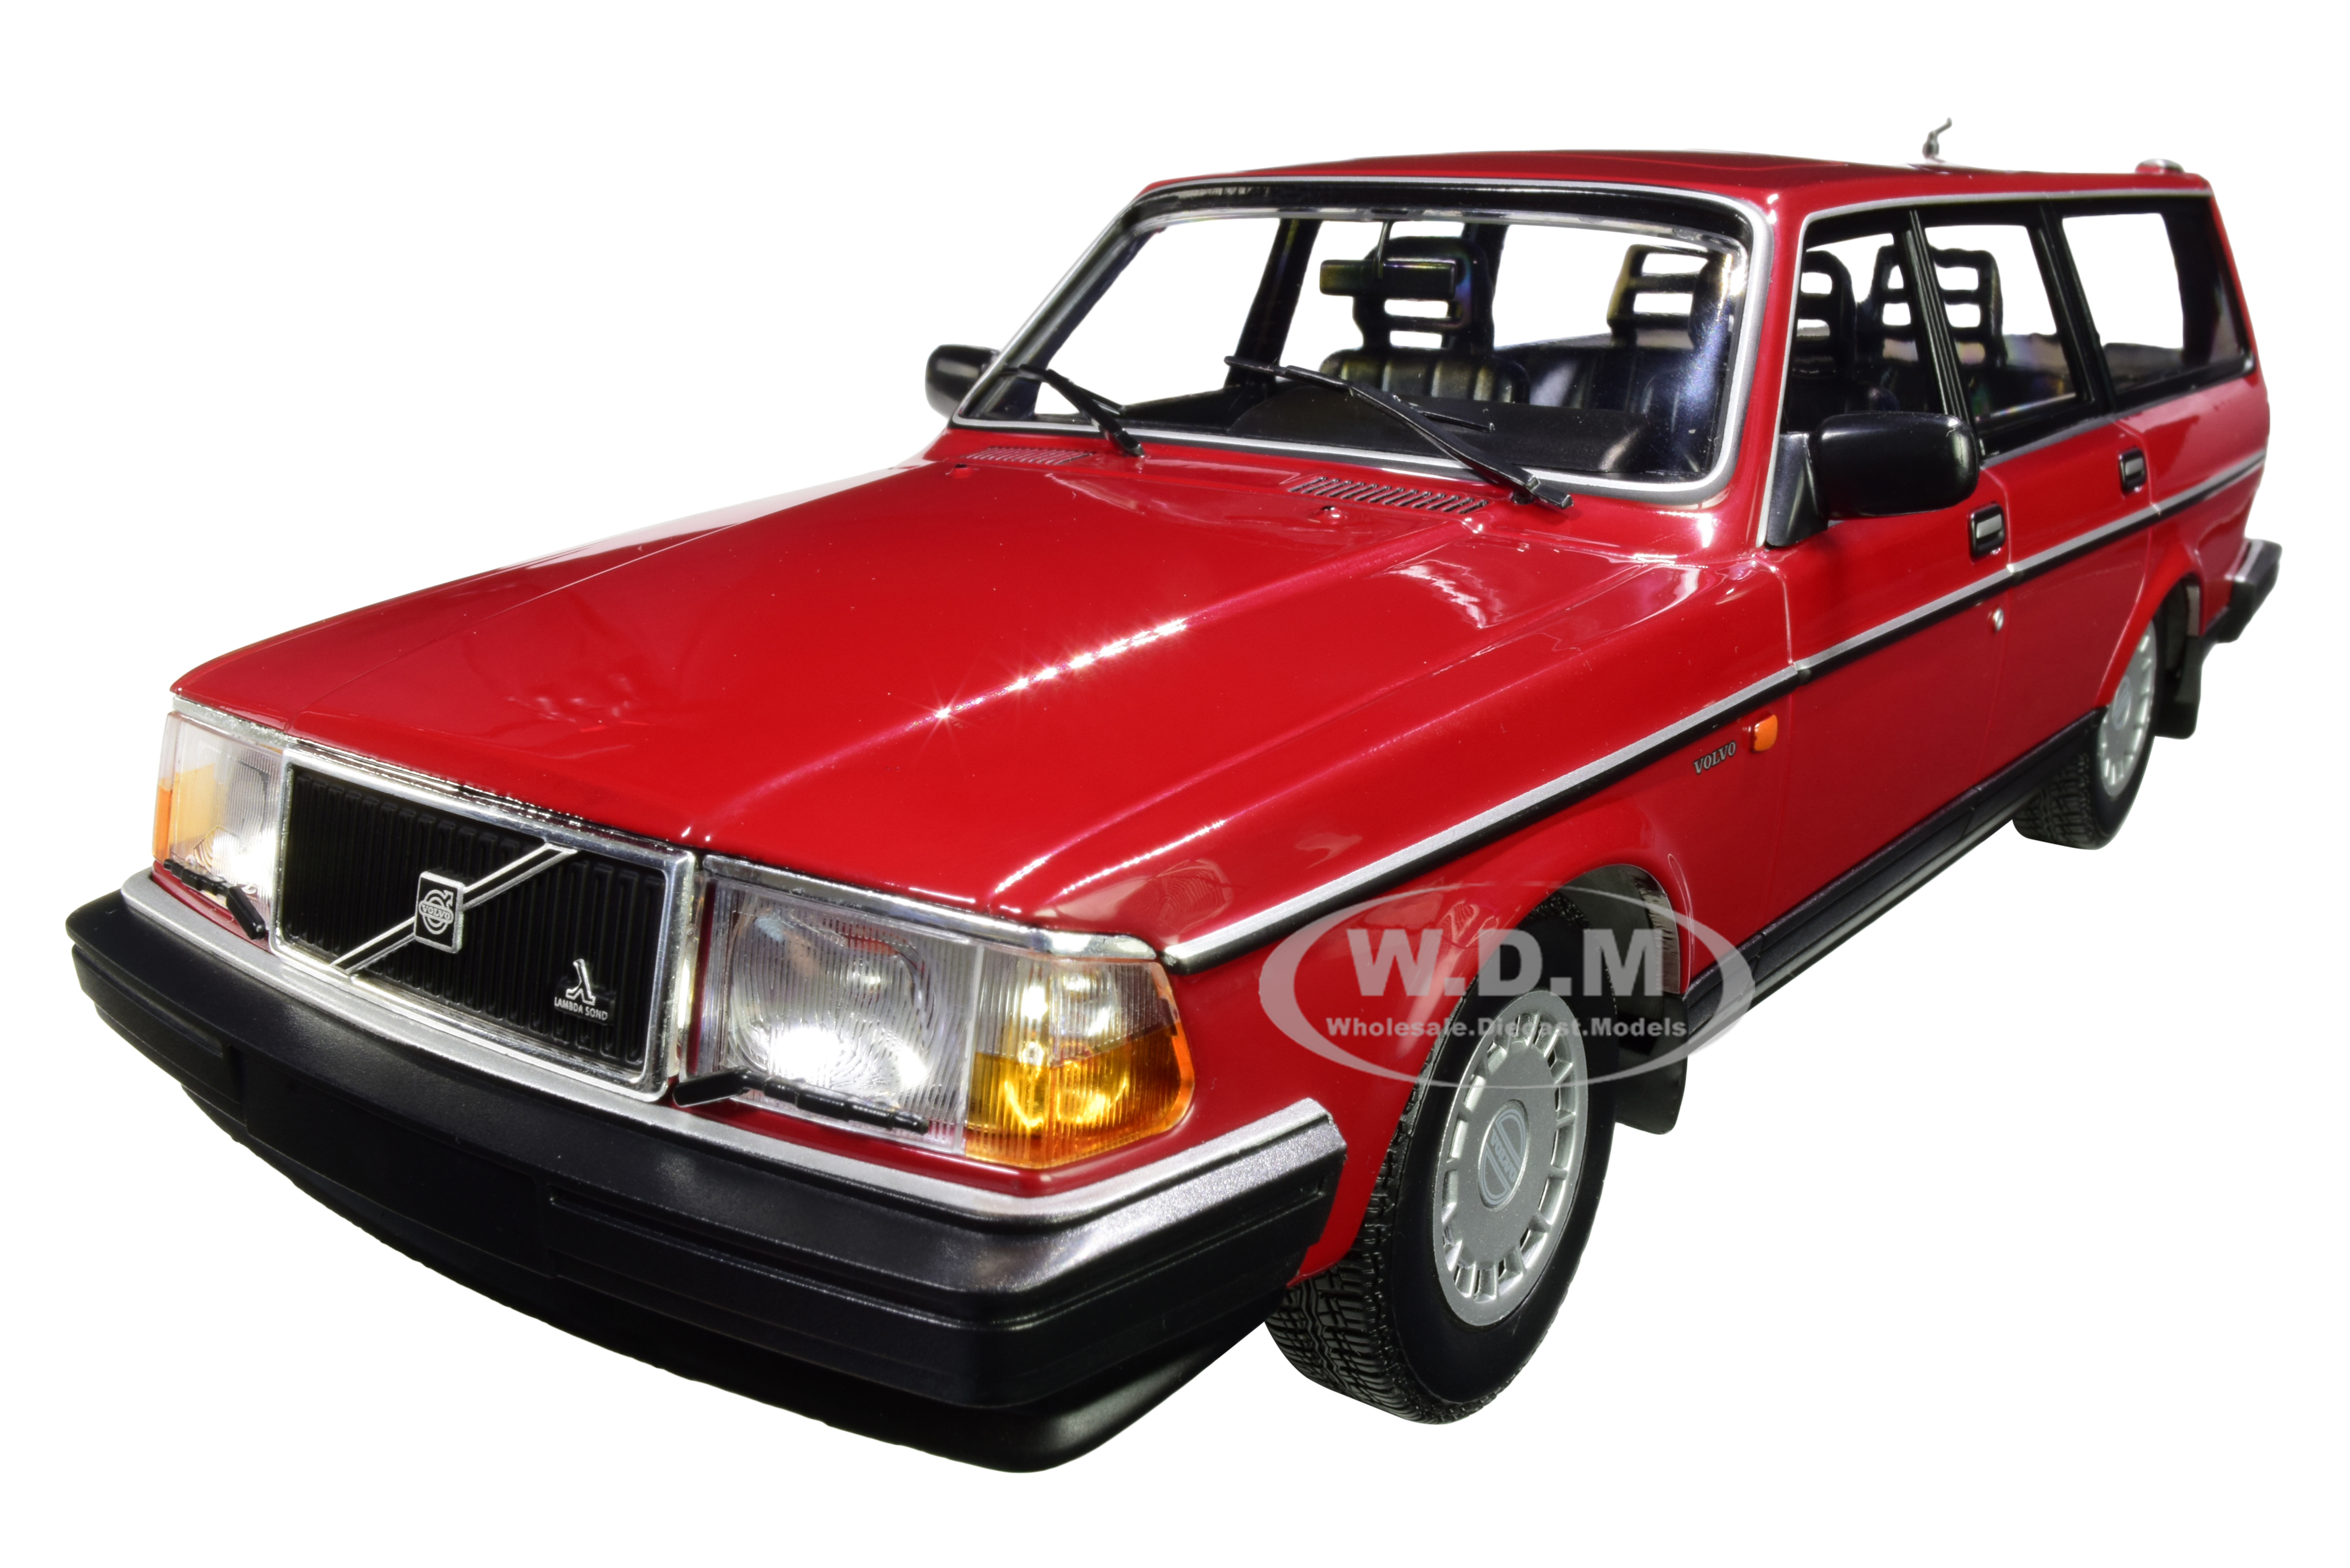 1986 Volvo 240 Gl Break Red Limited Edition To 600 Pieces Worldwide 1/18 Diecast Model Car By Minichamps